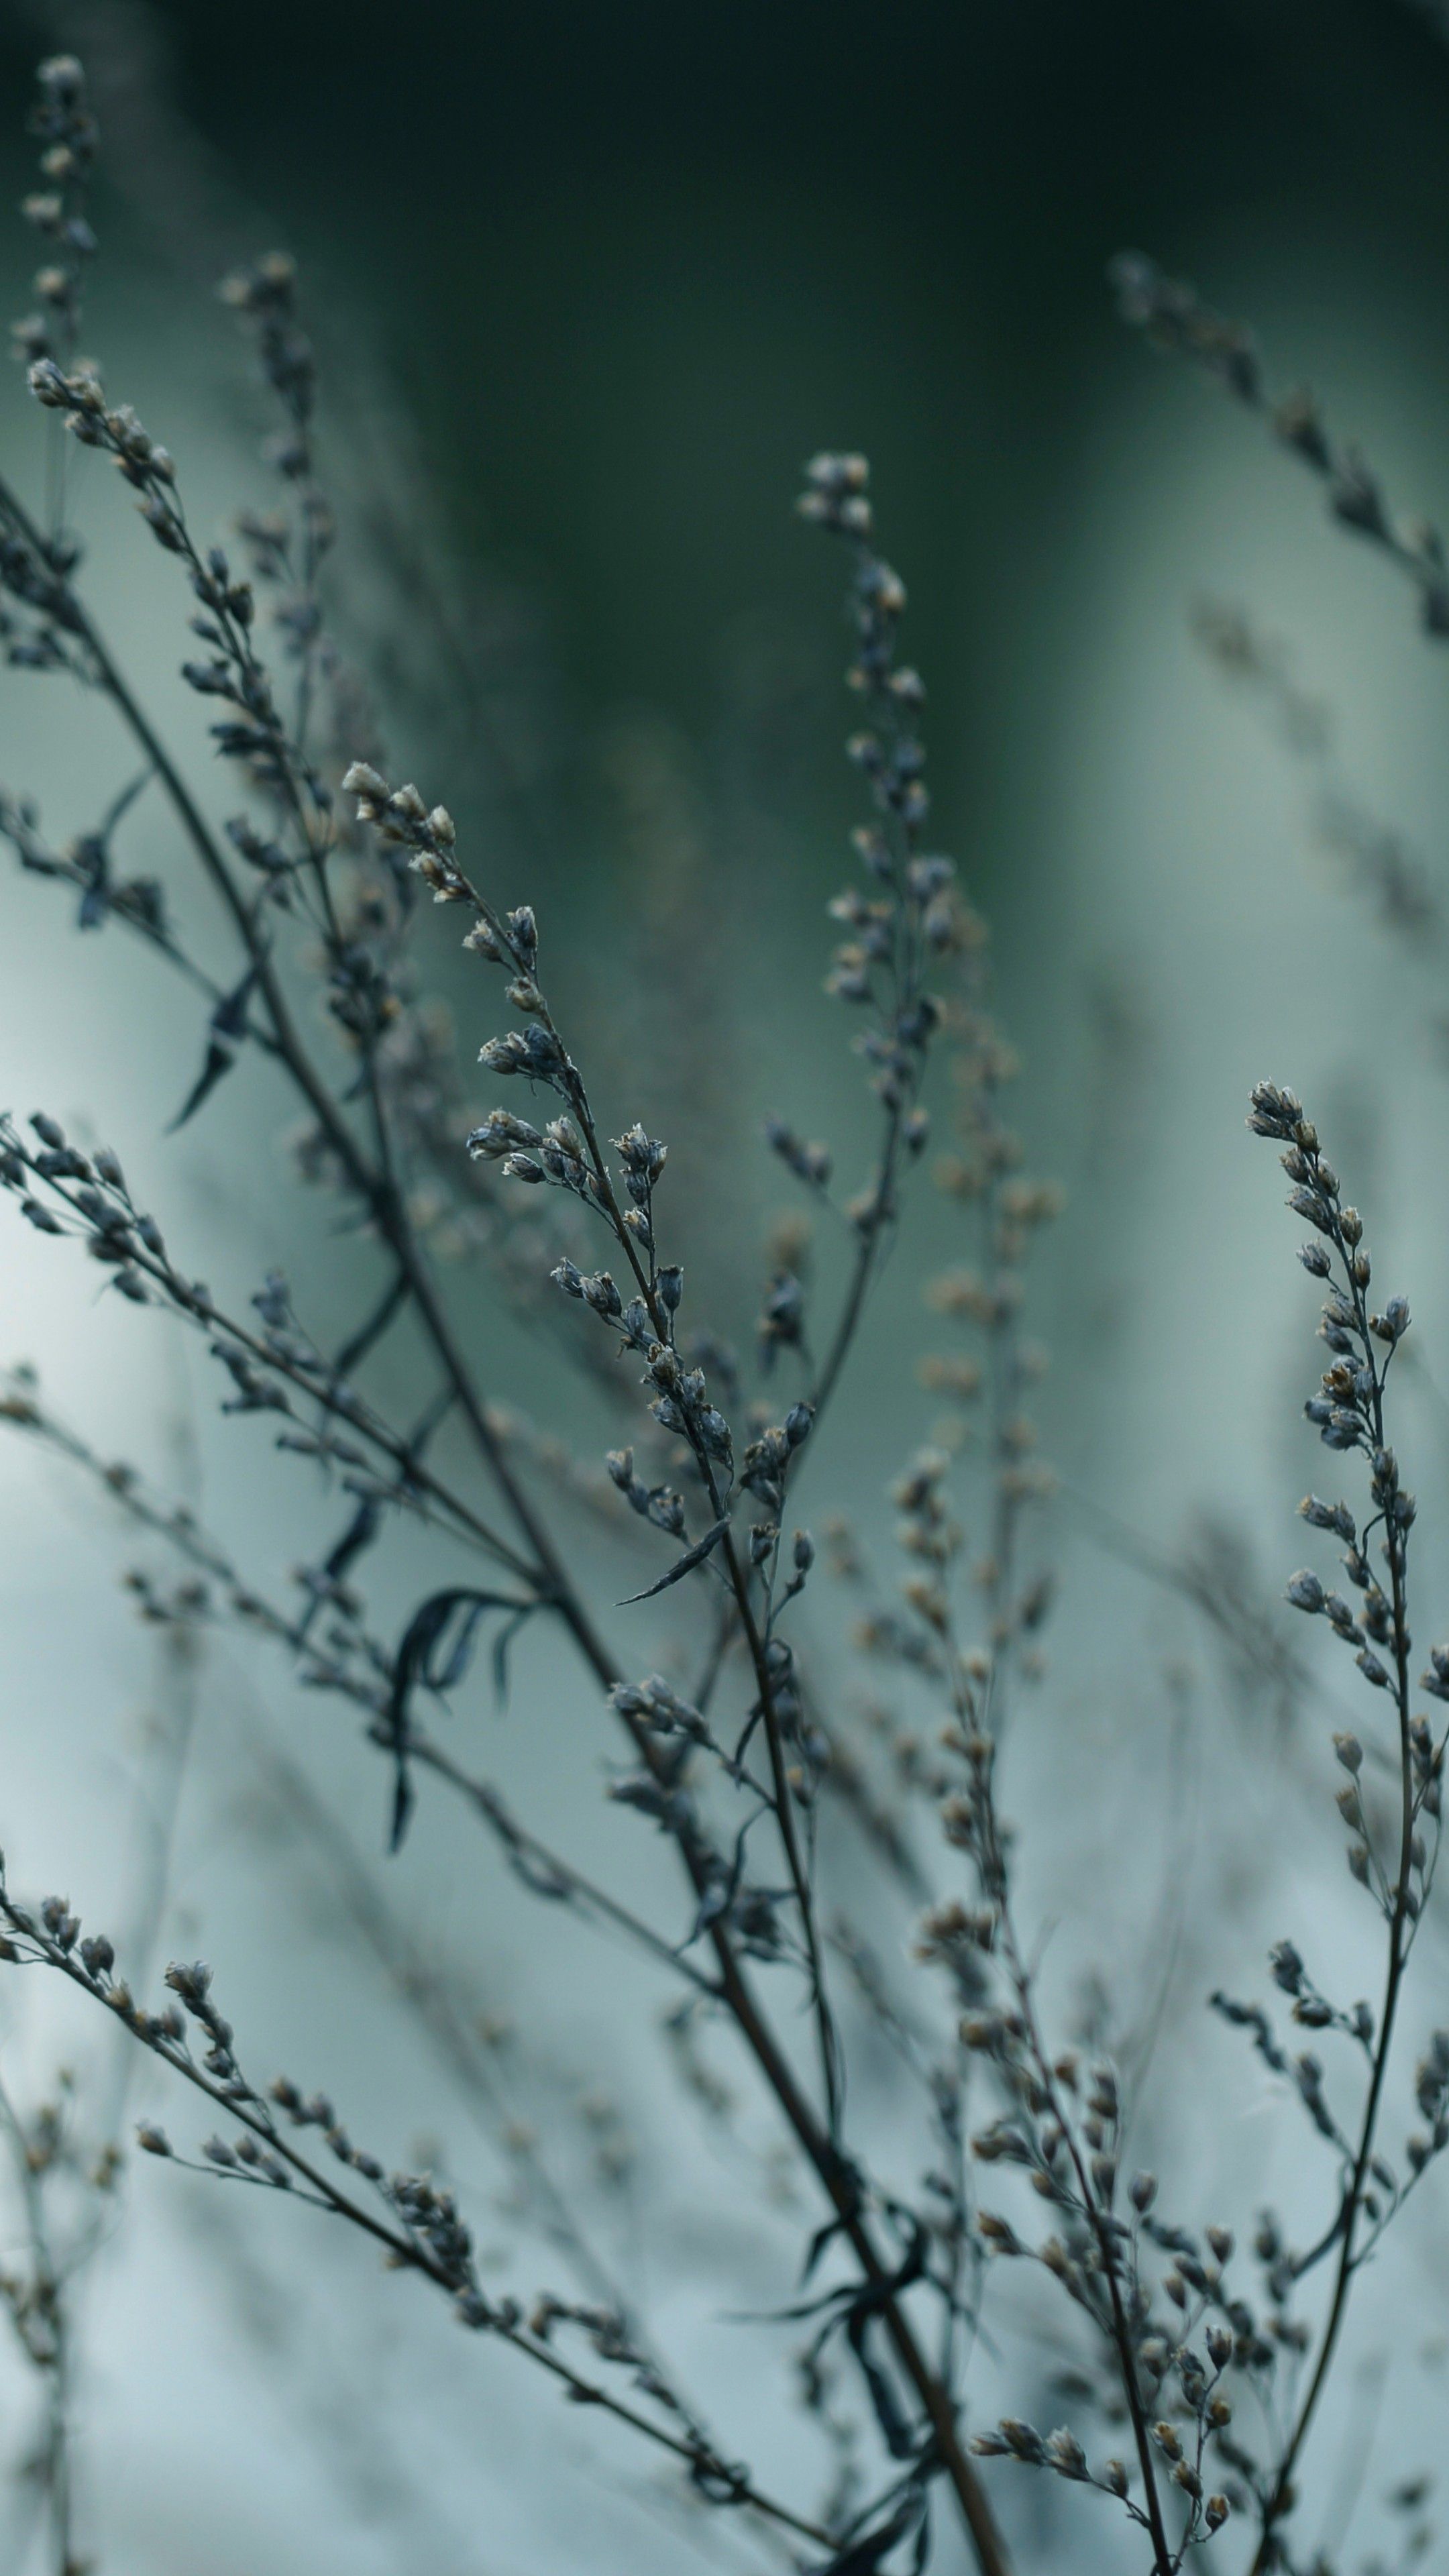 A close up of a plant with a blurry background - Macro